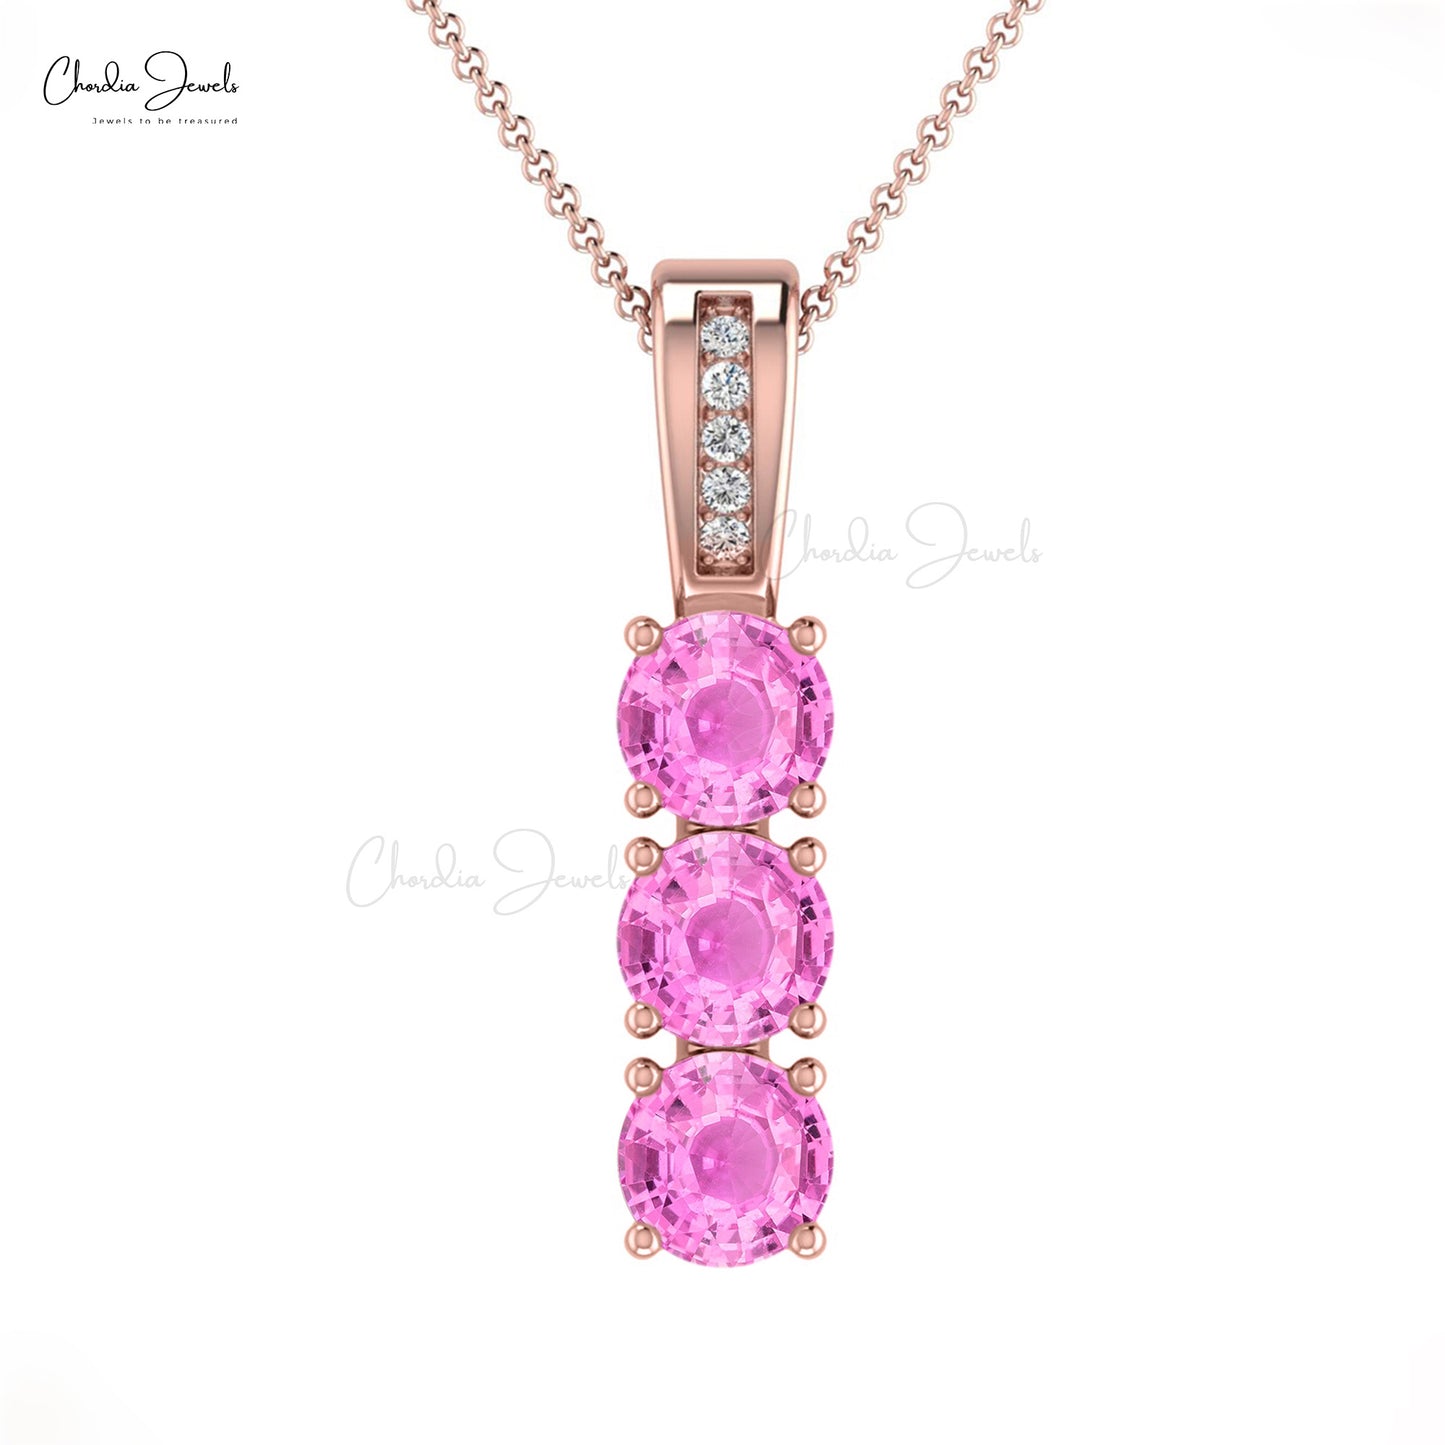 Load image into Gallery viewer, Beautiful 4mm Round Cut Gemstone Pendant Necklace Natural Pink Sapphire 3-Stone Pendant 14k Solid Gold Diamond Jewelry For Engagement Gift
